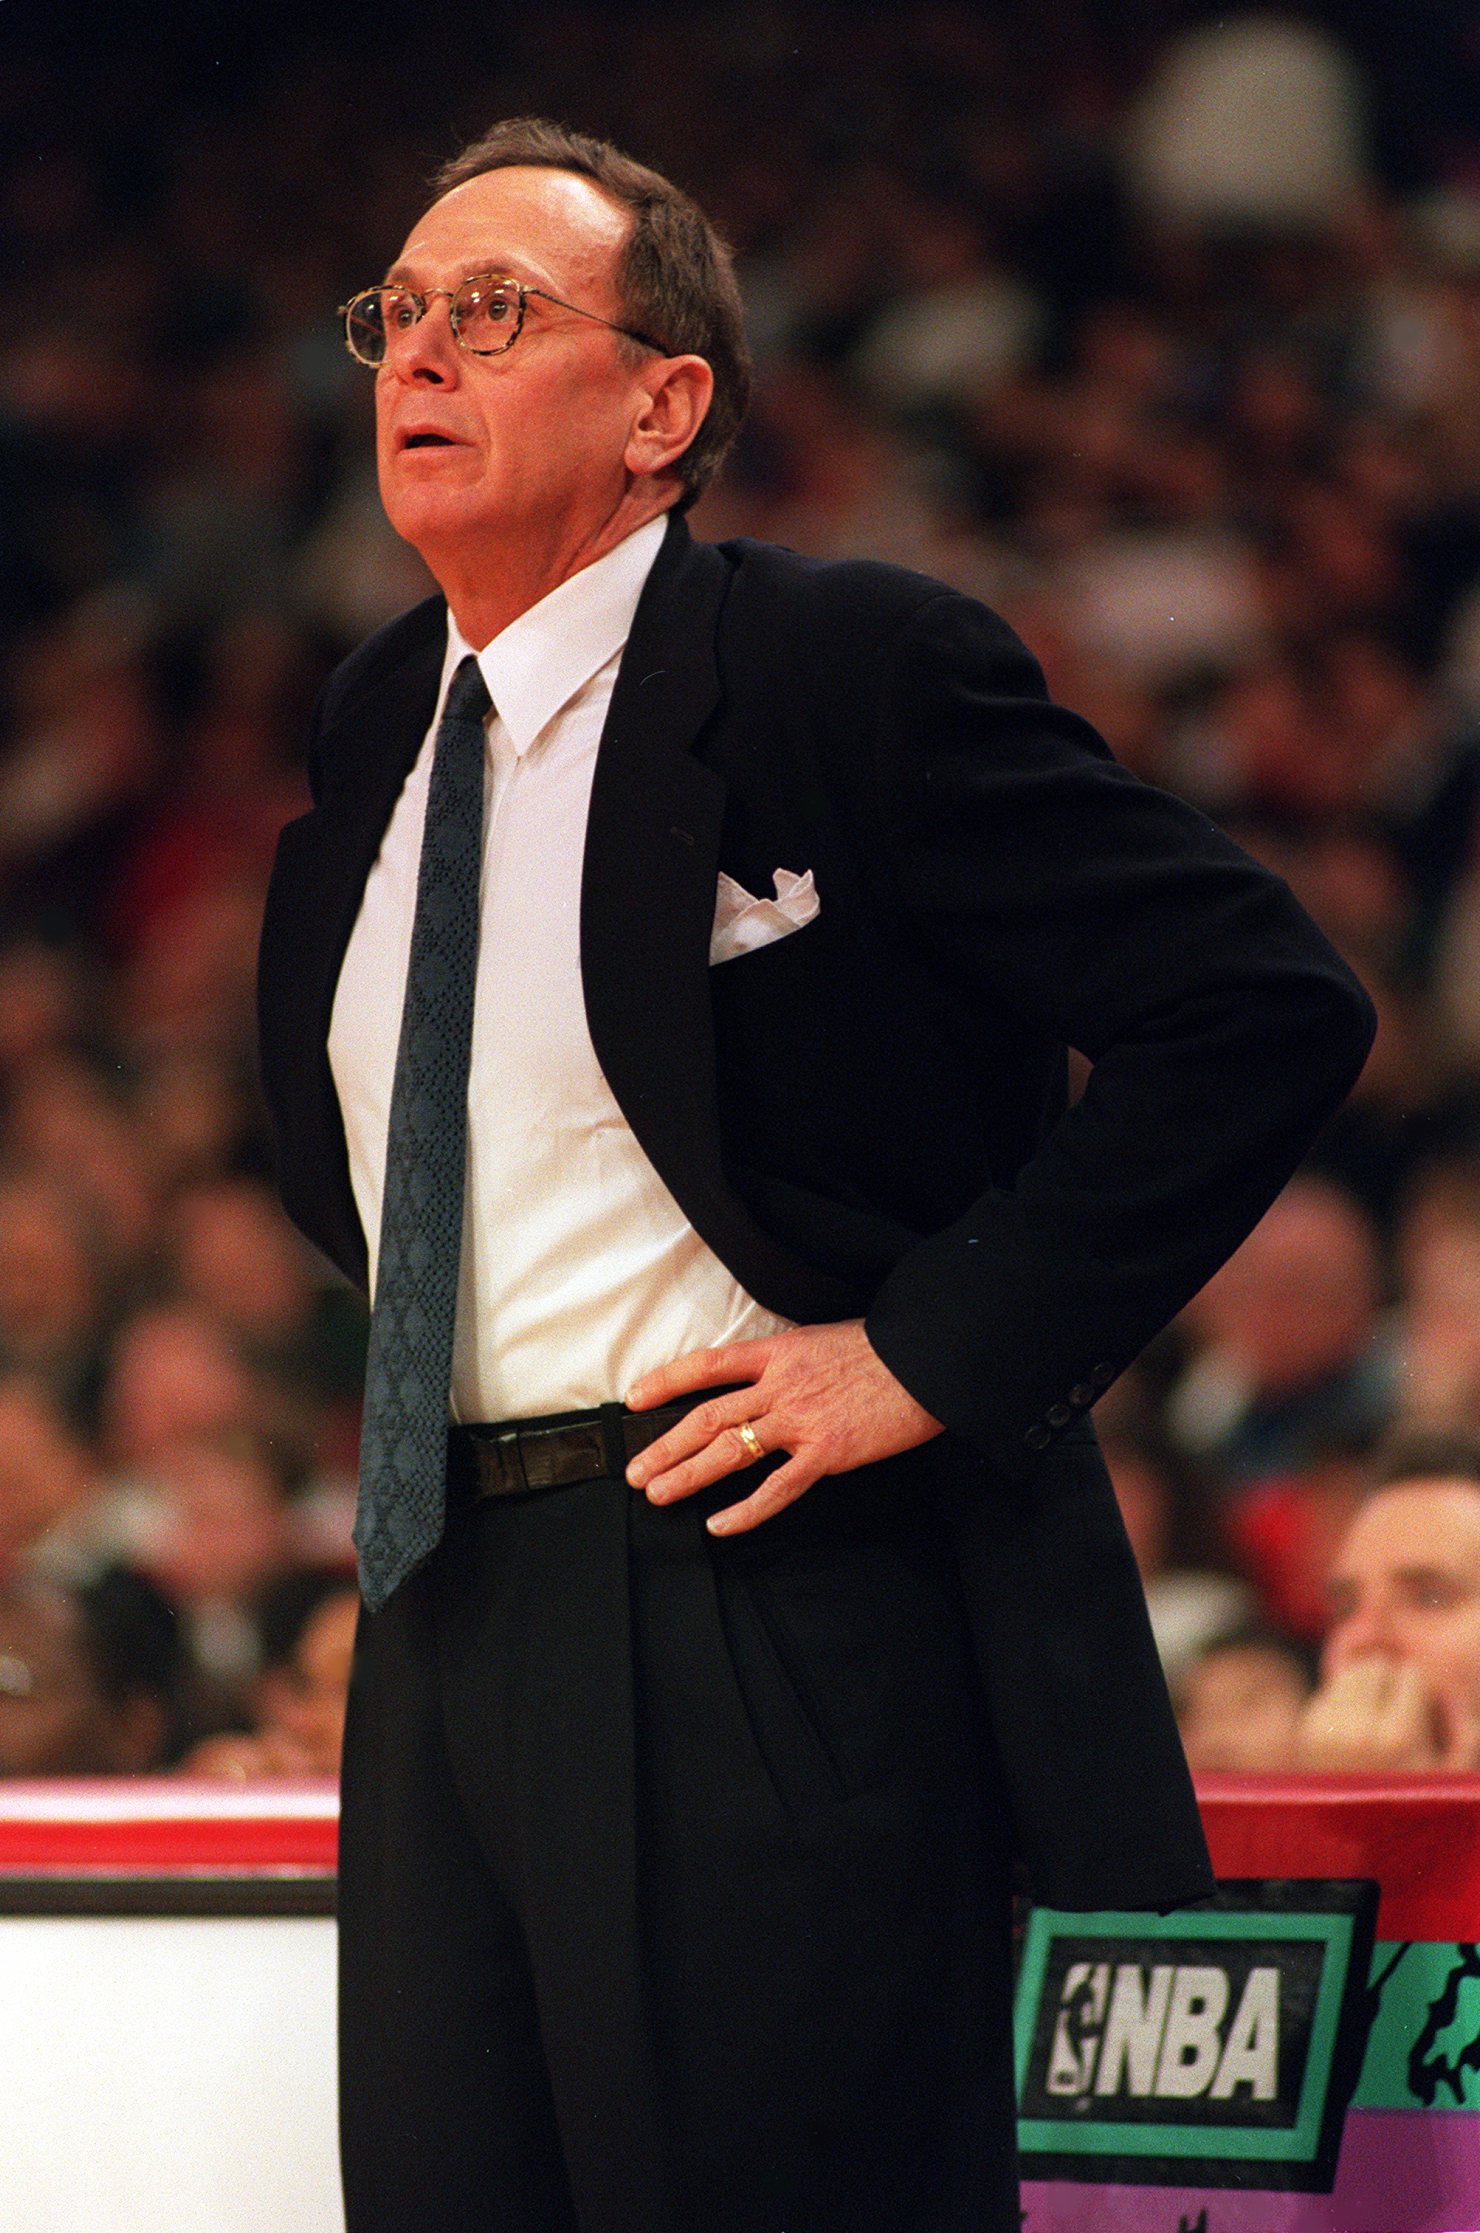 21 Jan 1994: INDIANA COACH LARRY BROWN FROM THE SIDELINES DURING THE PACERS 96-95 LOSS TO THE CHICAGO BULLS.